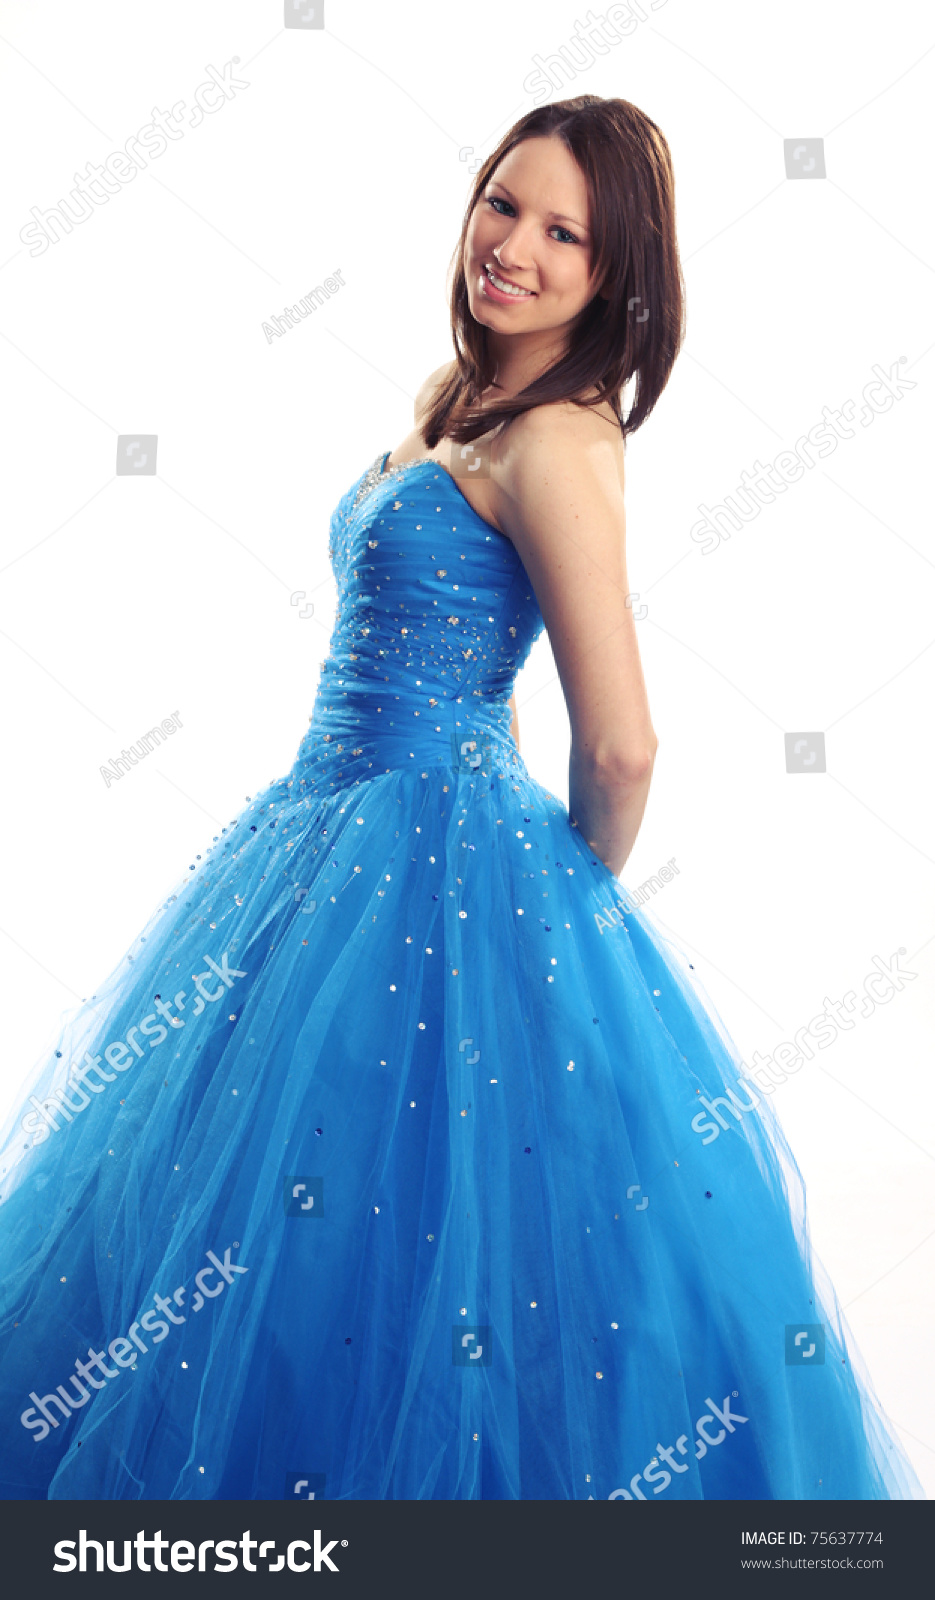 Teen In Blue Dress, Prom Or Bridesmaid Stock Photo 75637774 : Shutterstock